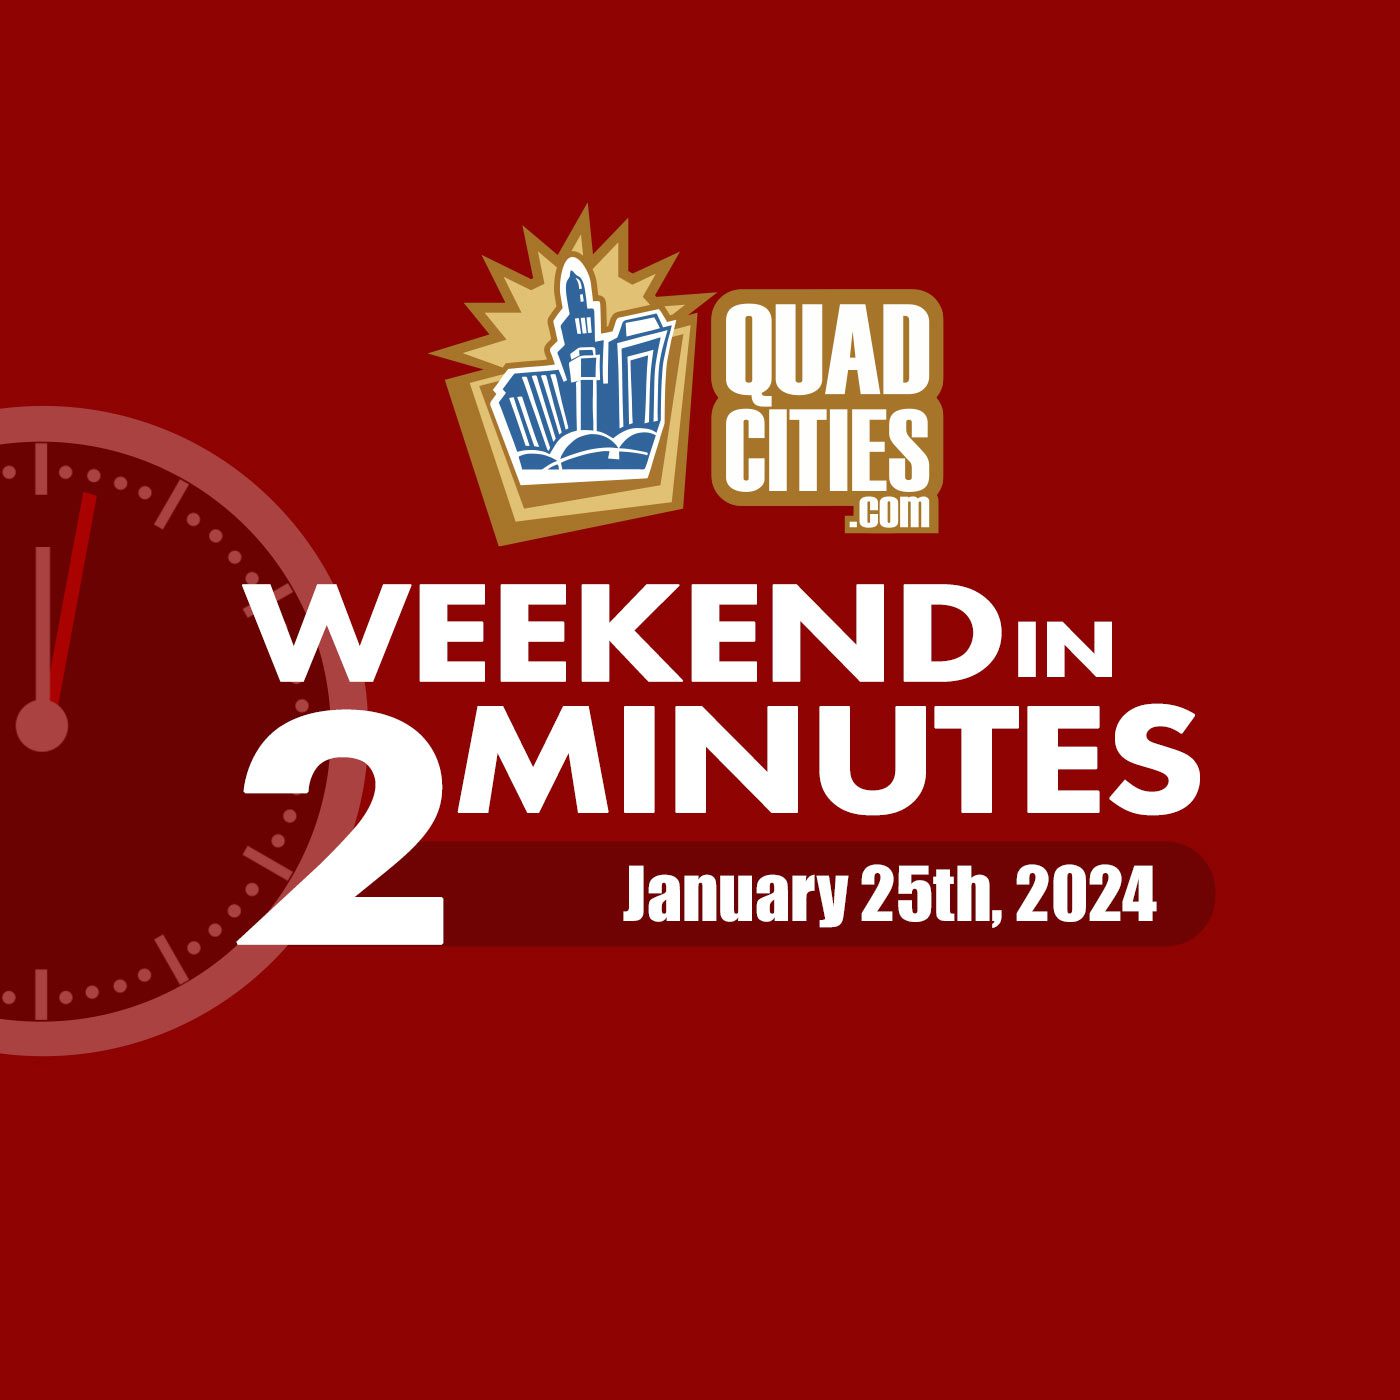 Quad Cities Weekend In 2 Minutes January 25th, 2024 Quad Cities